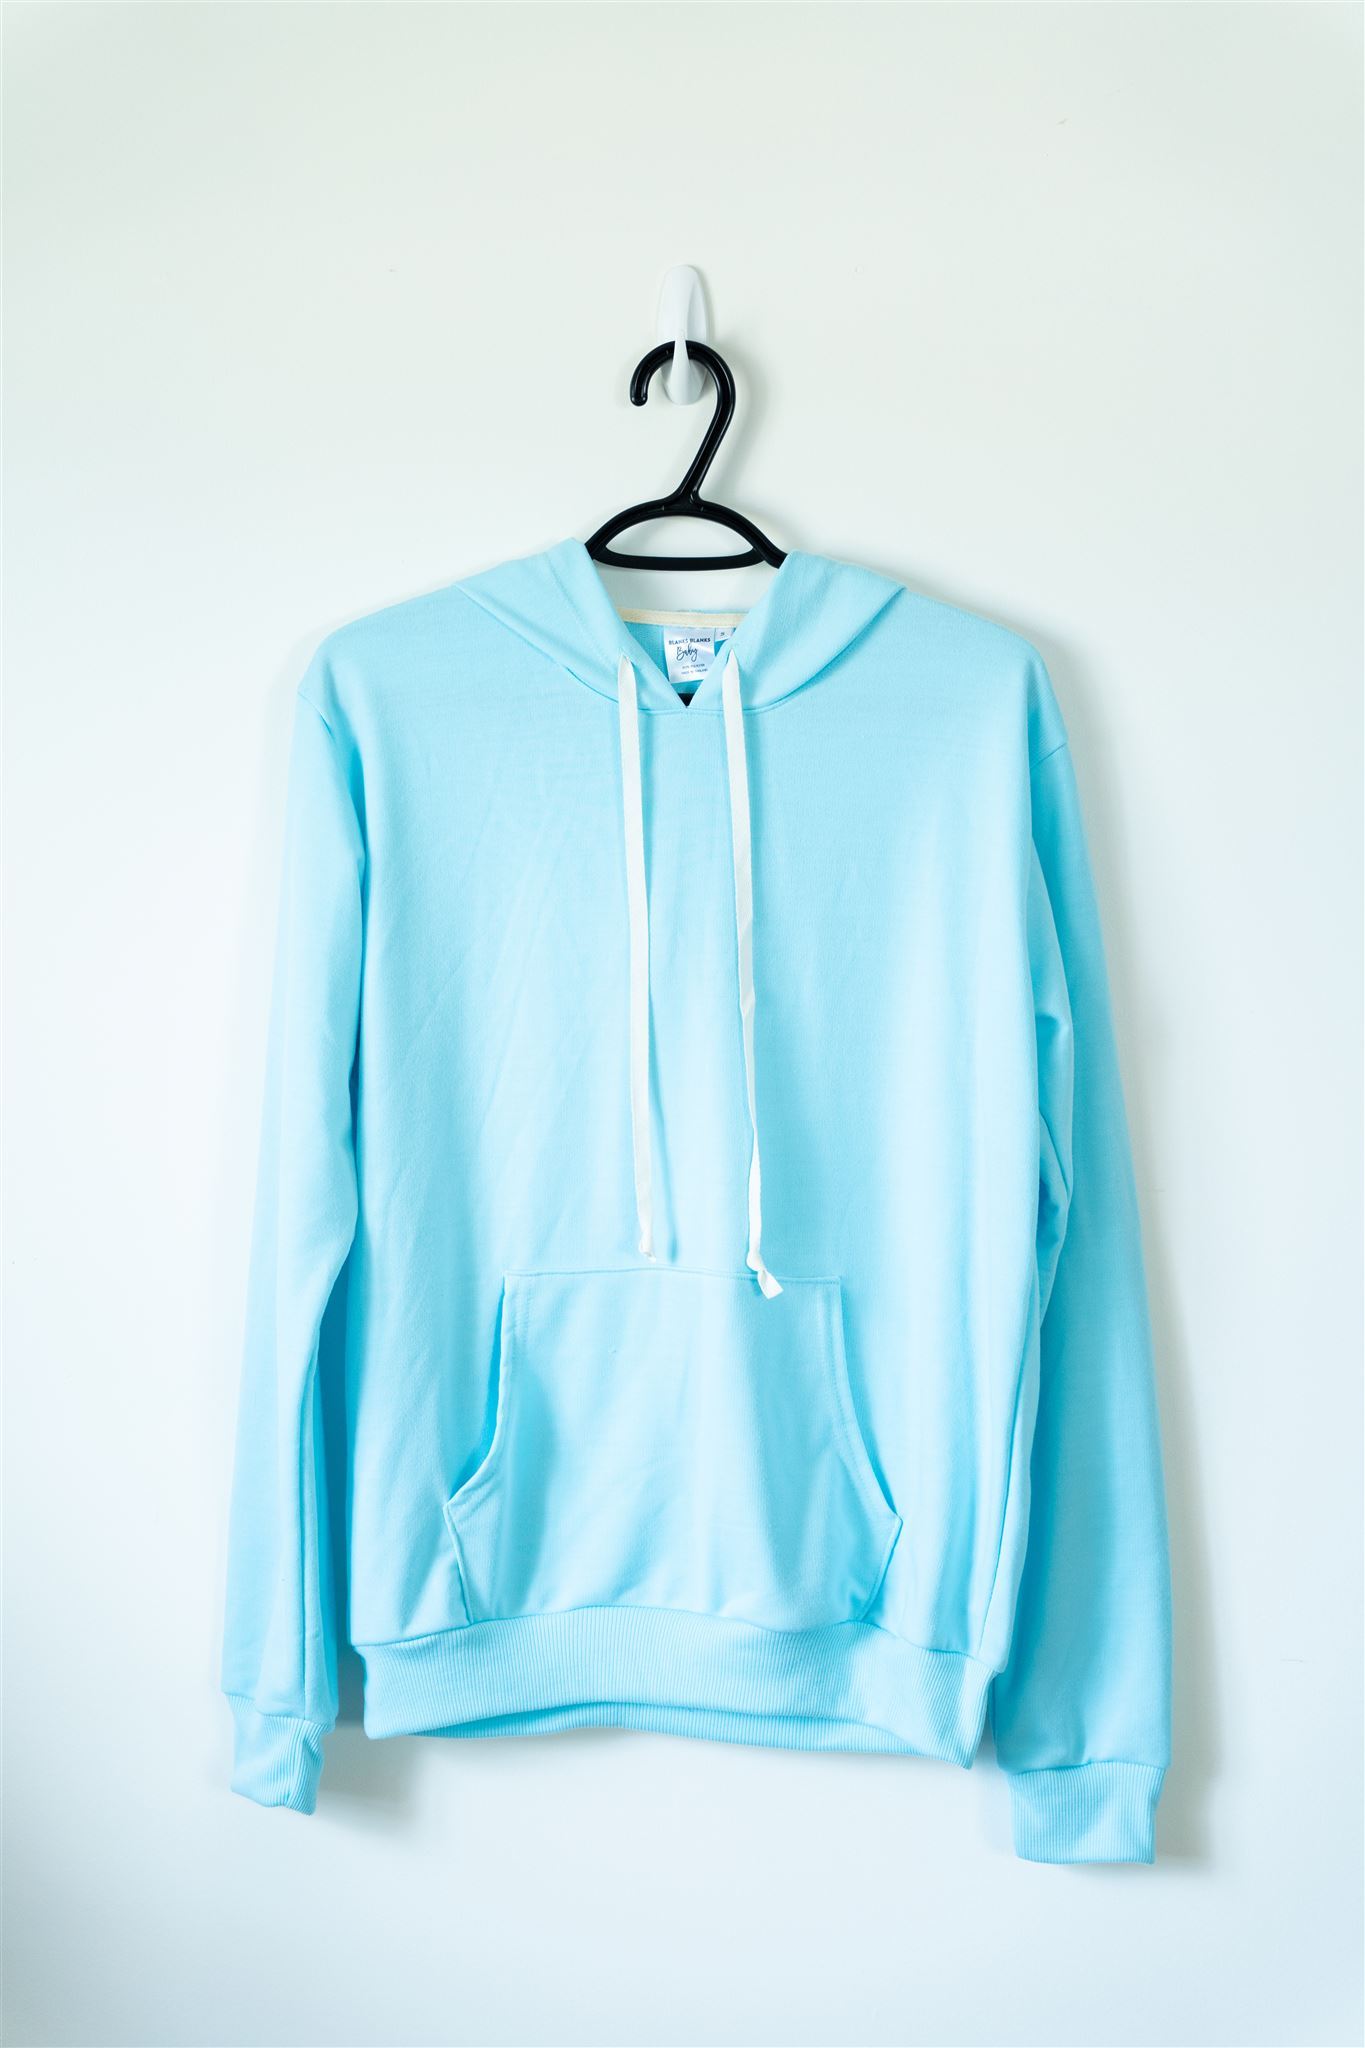 100% Polyester Hoodies - In Stock Blue / Small Hoodie